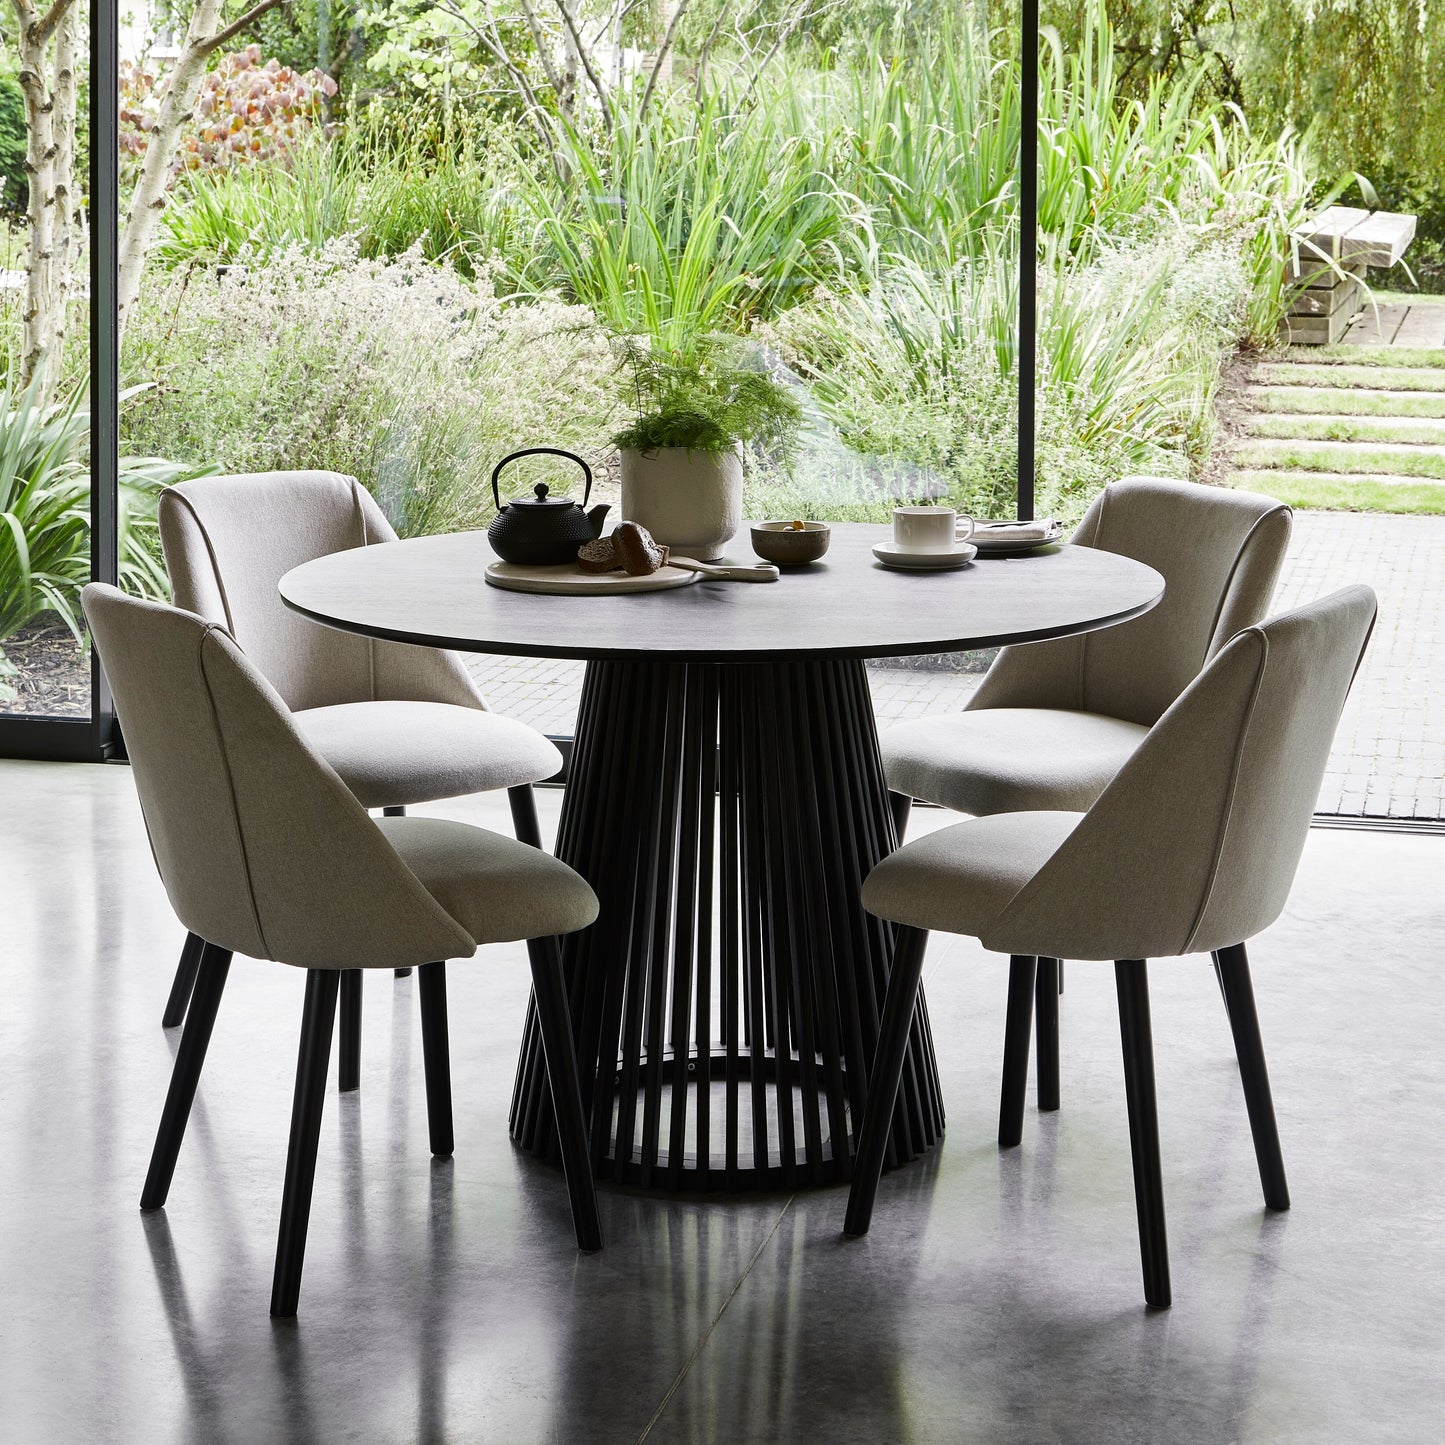 Willow 4 Seater Black Dining Table Set - Freya Oatmeal Dining Chairs with Black Legs - Laura James